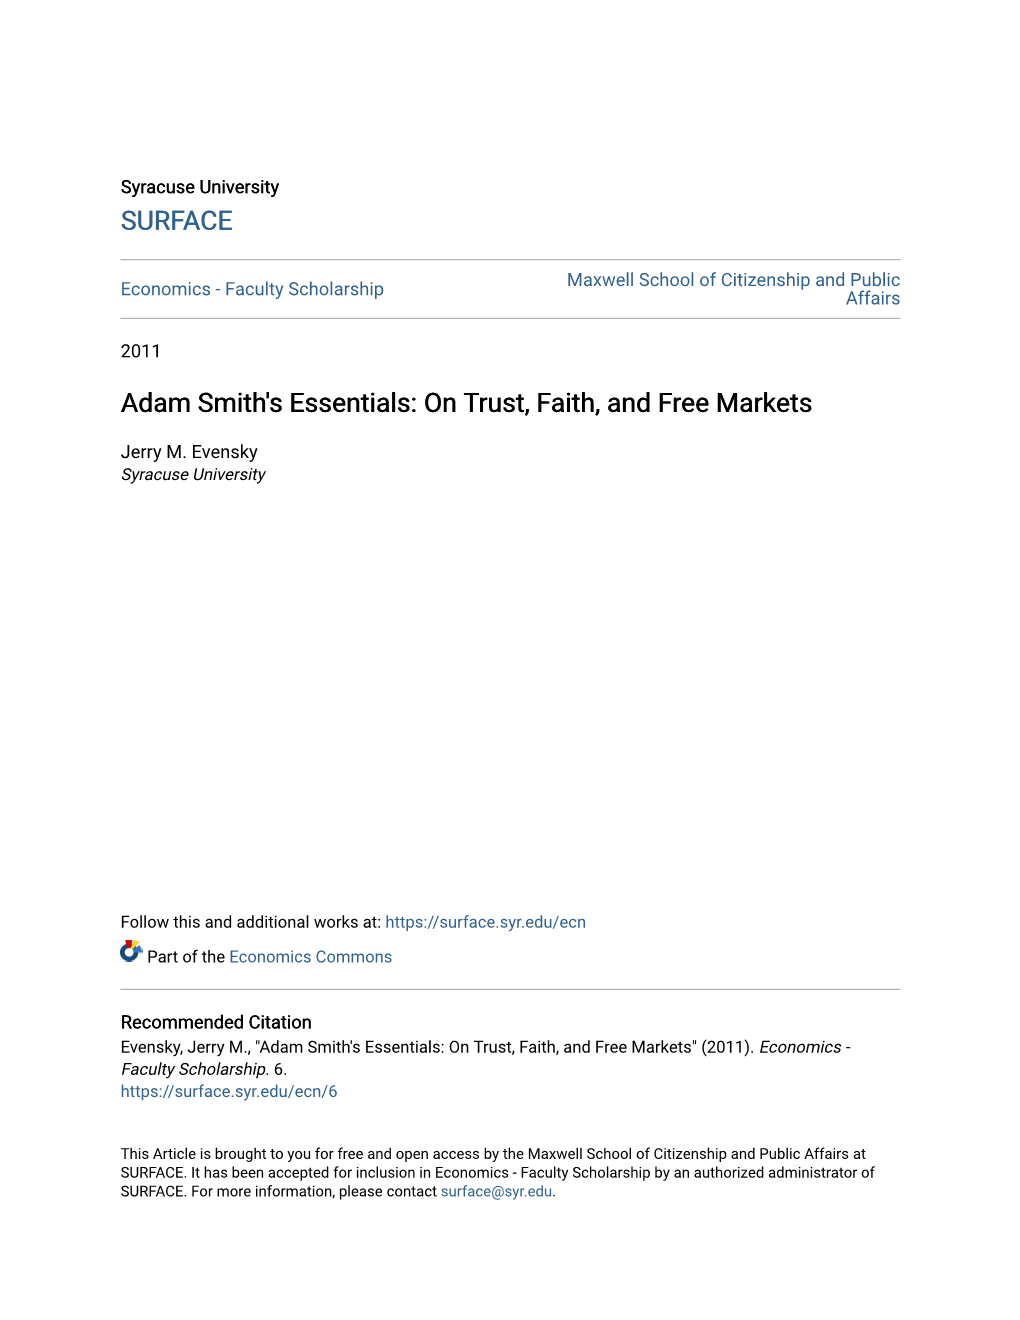 Adam Smith's Essentials: on Trust, Faith, and Free Markets